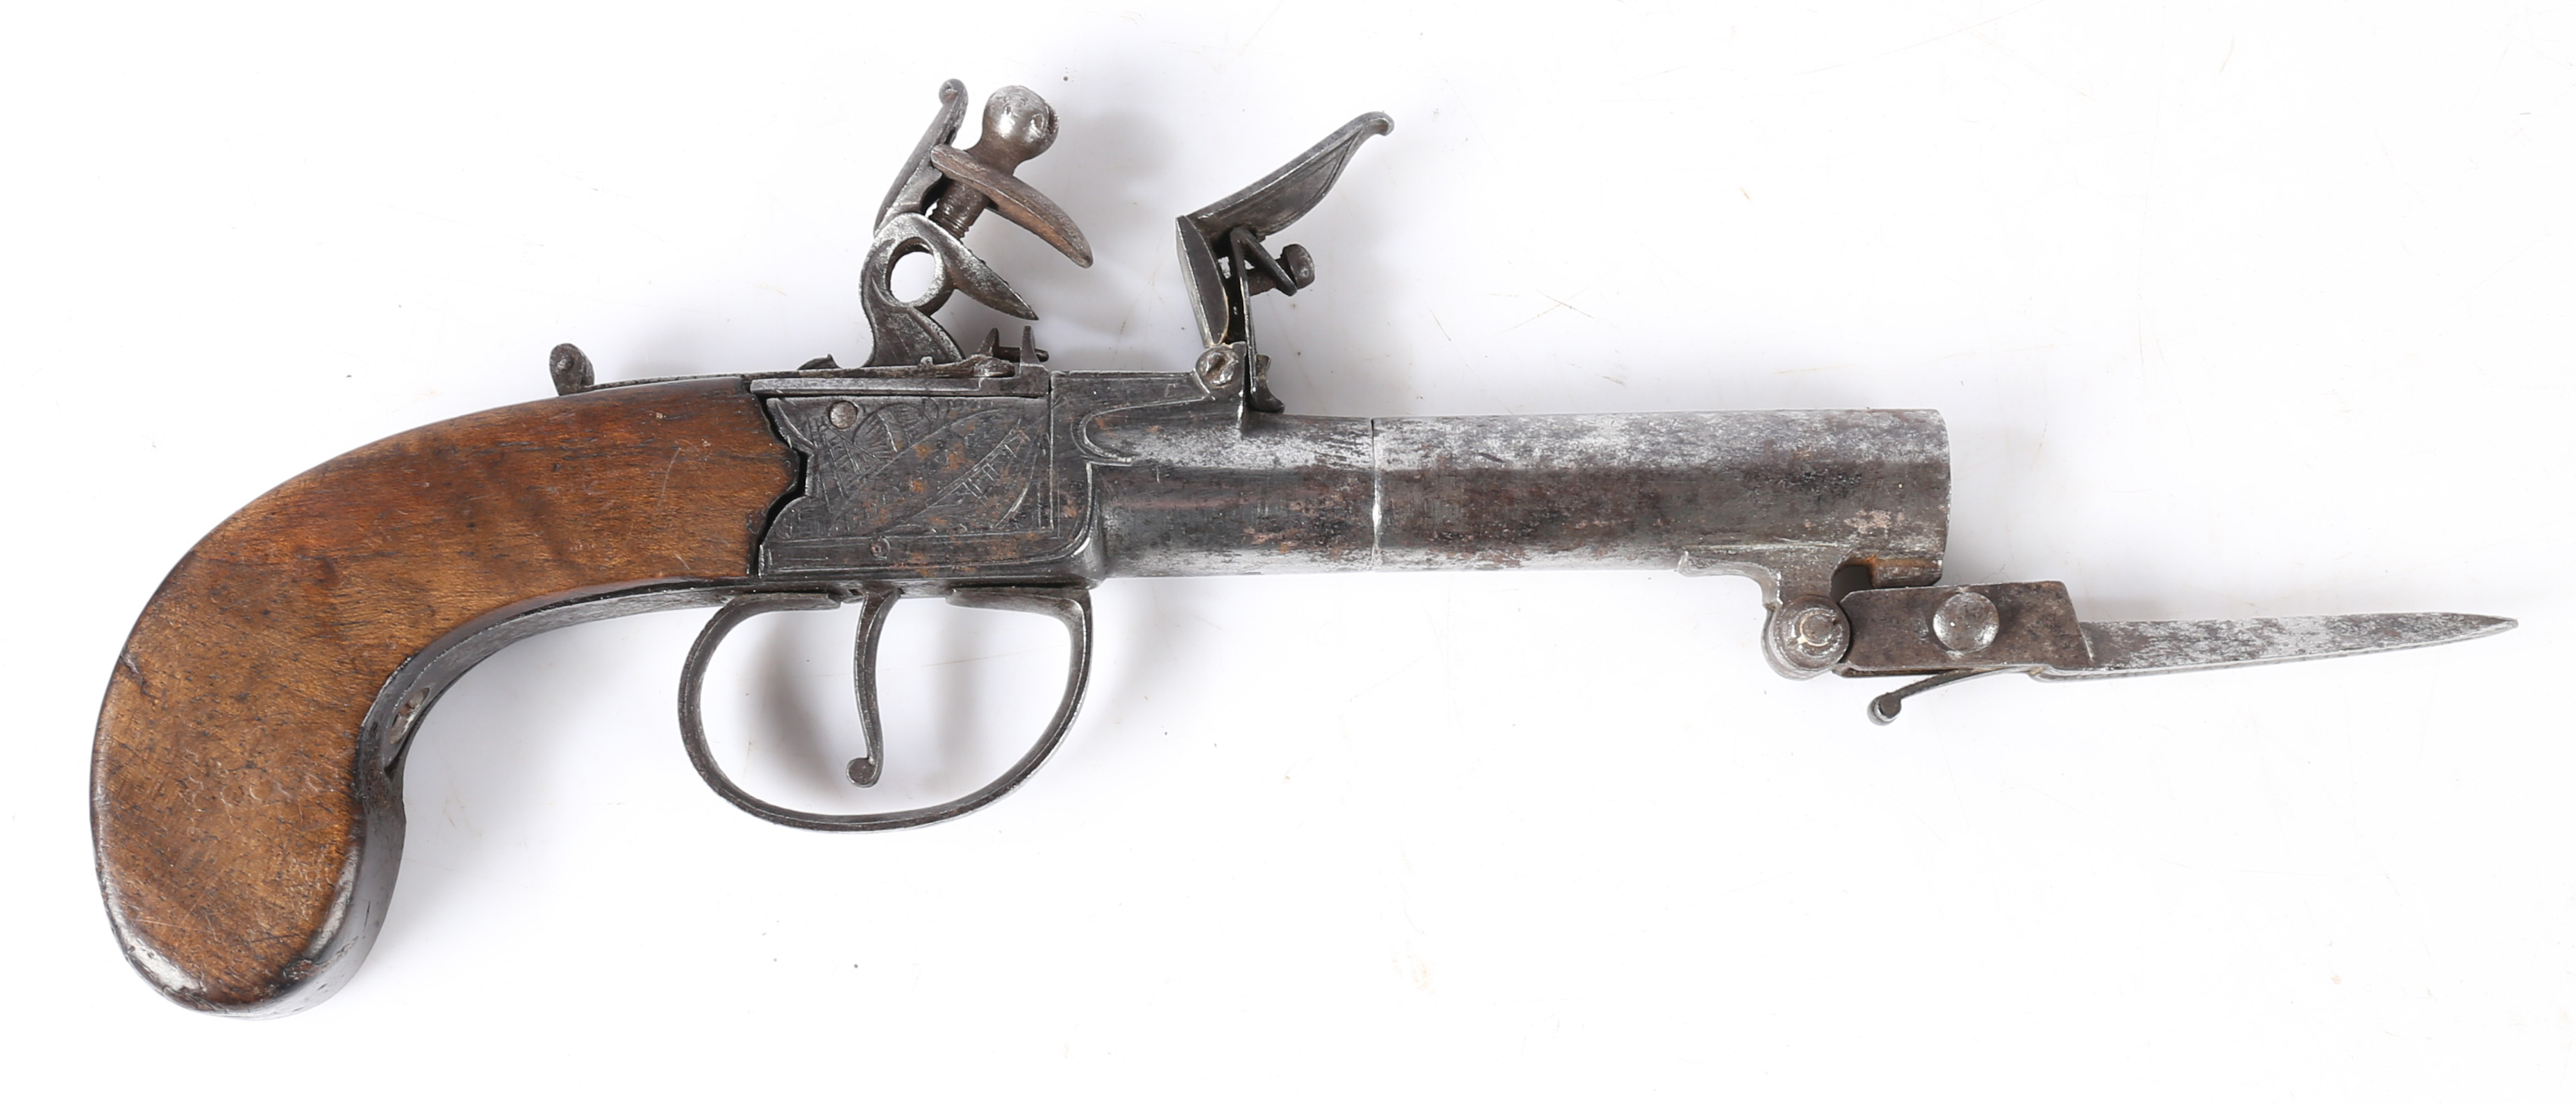 Early 19th century Pocket Flintlock Pistol by Alexander Babb of Edinburgh, signed to the engraved